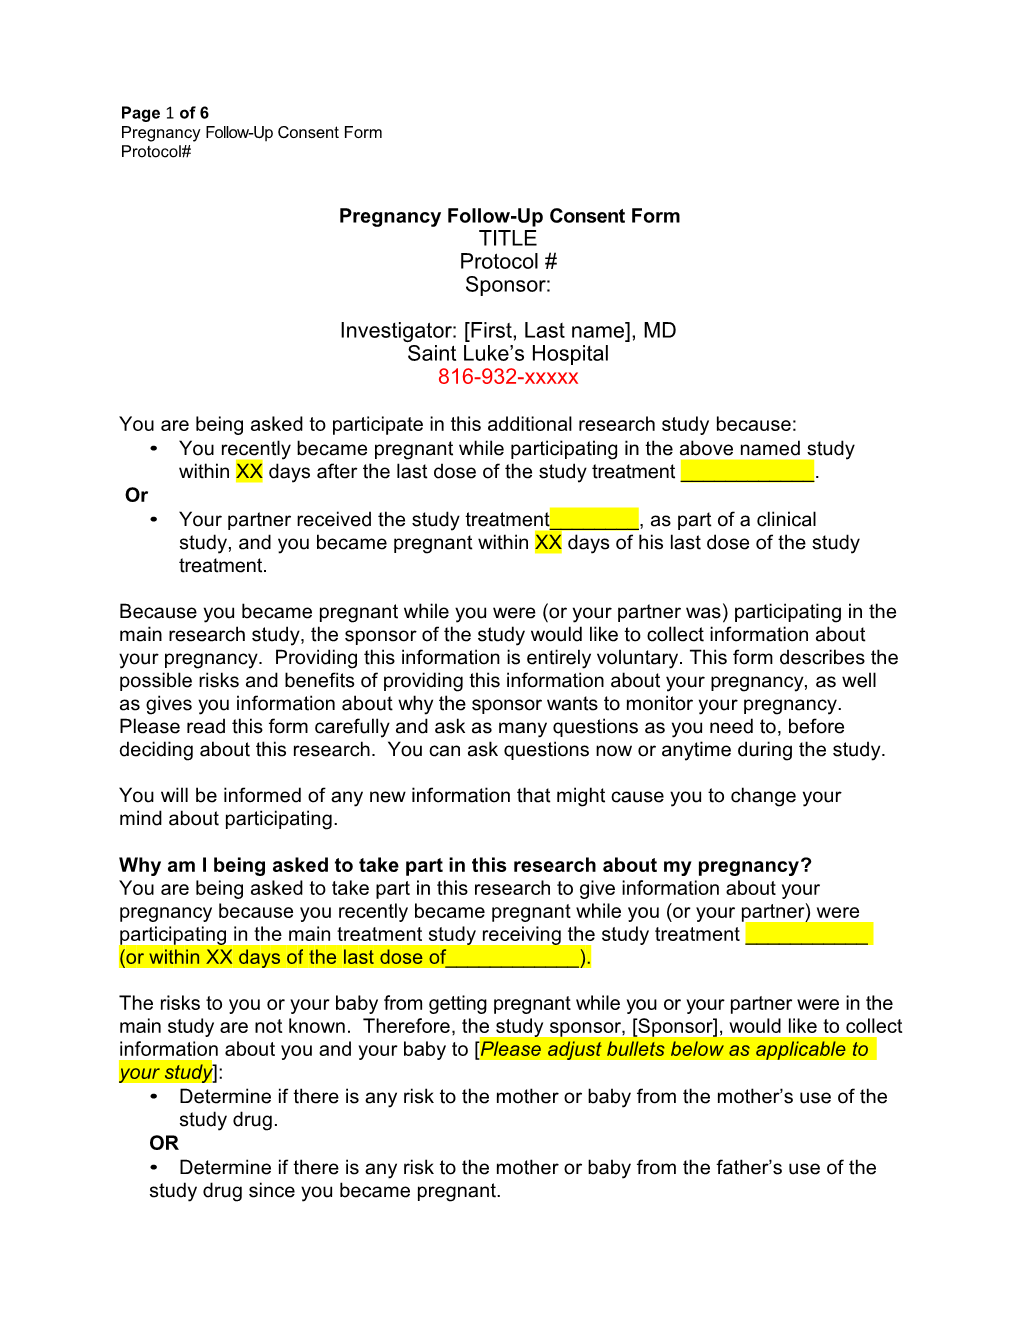 Pregnancy Follow-Up Consent Form